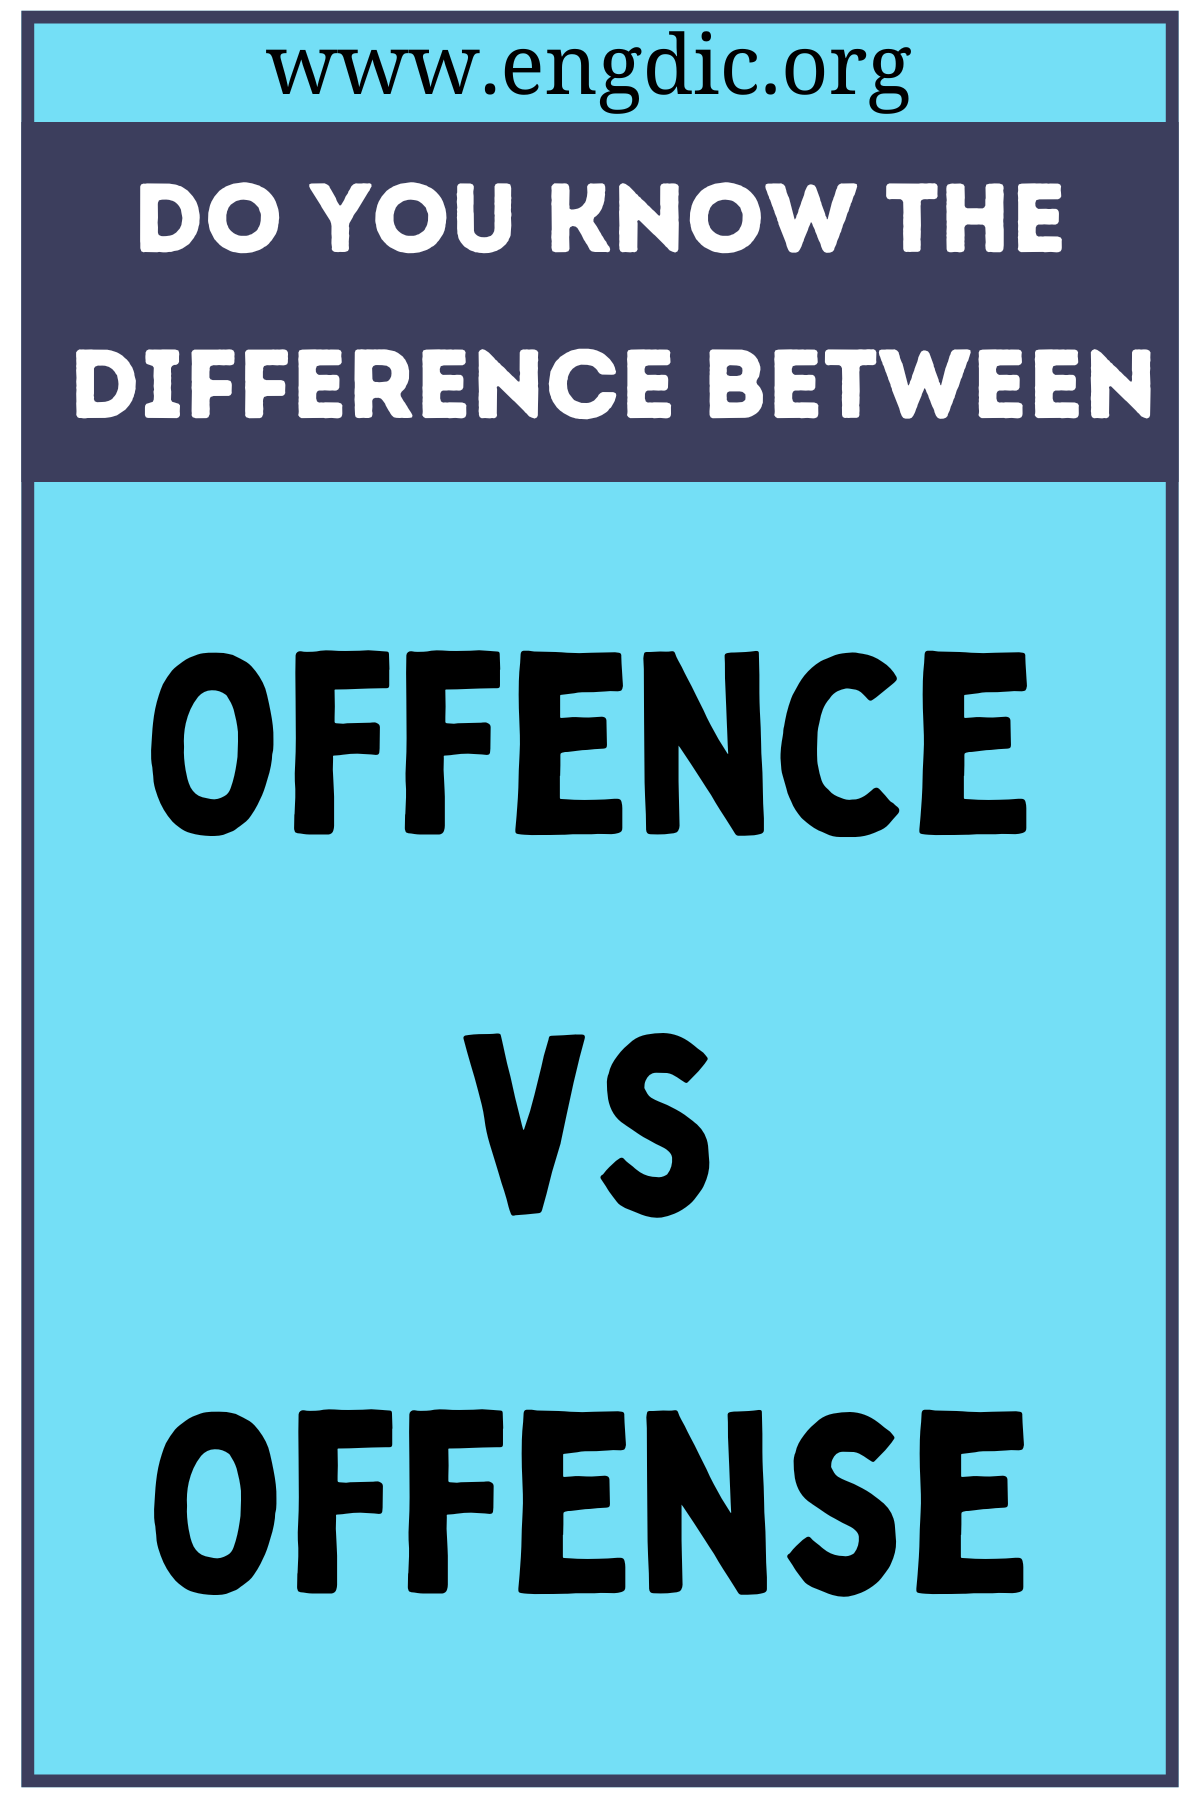 Offence vs Offense